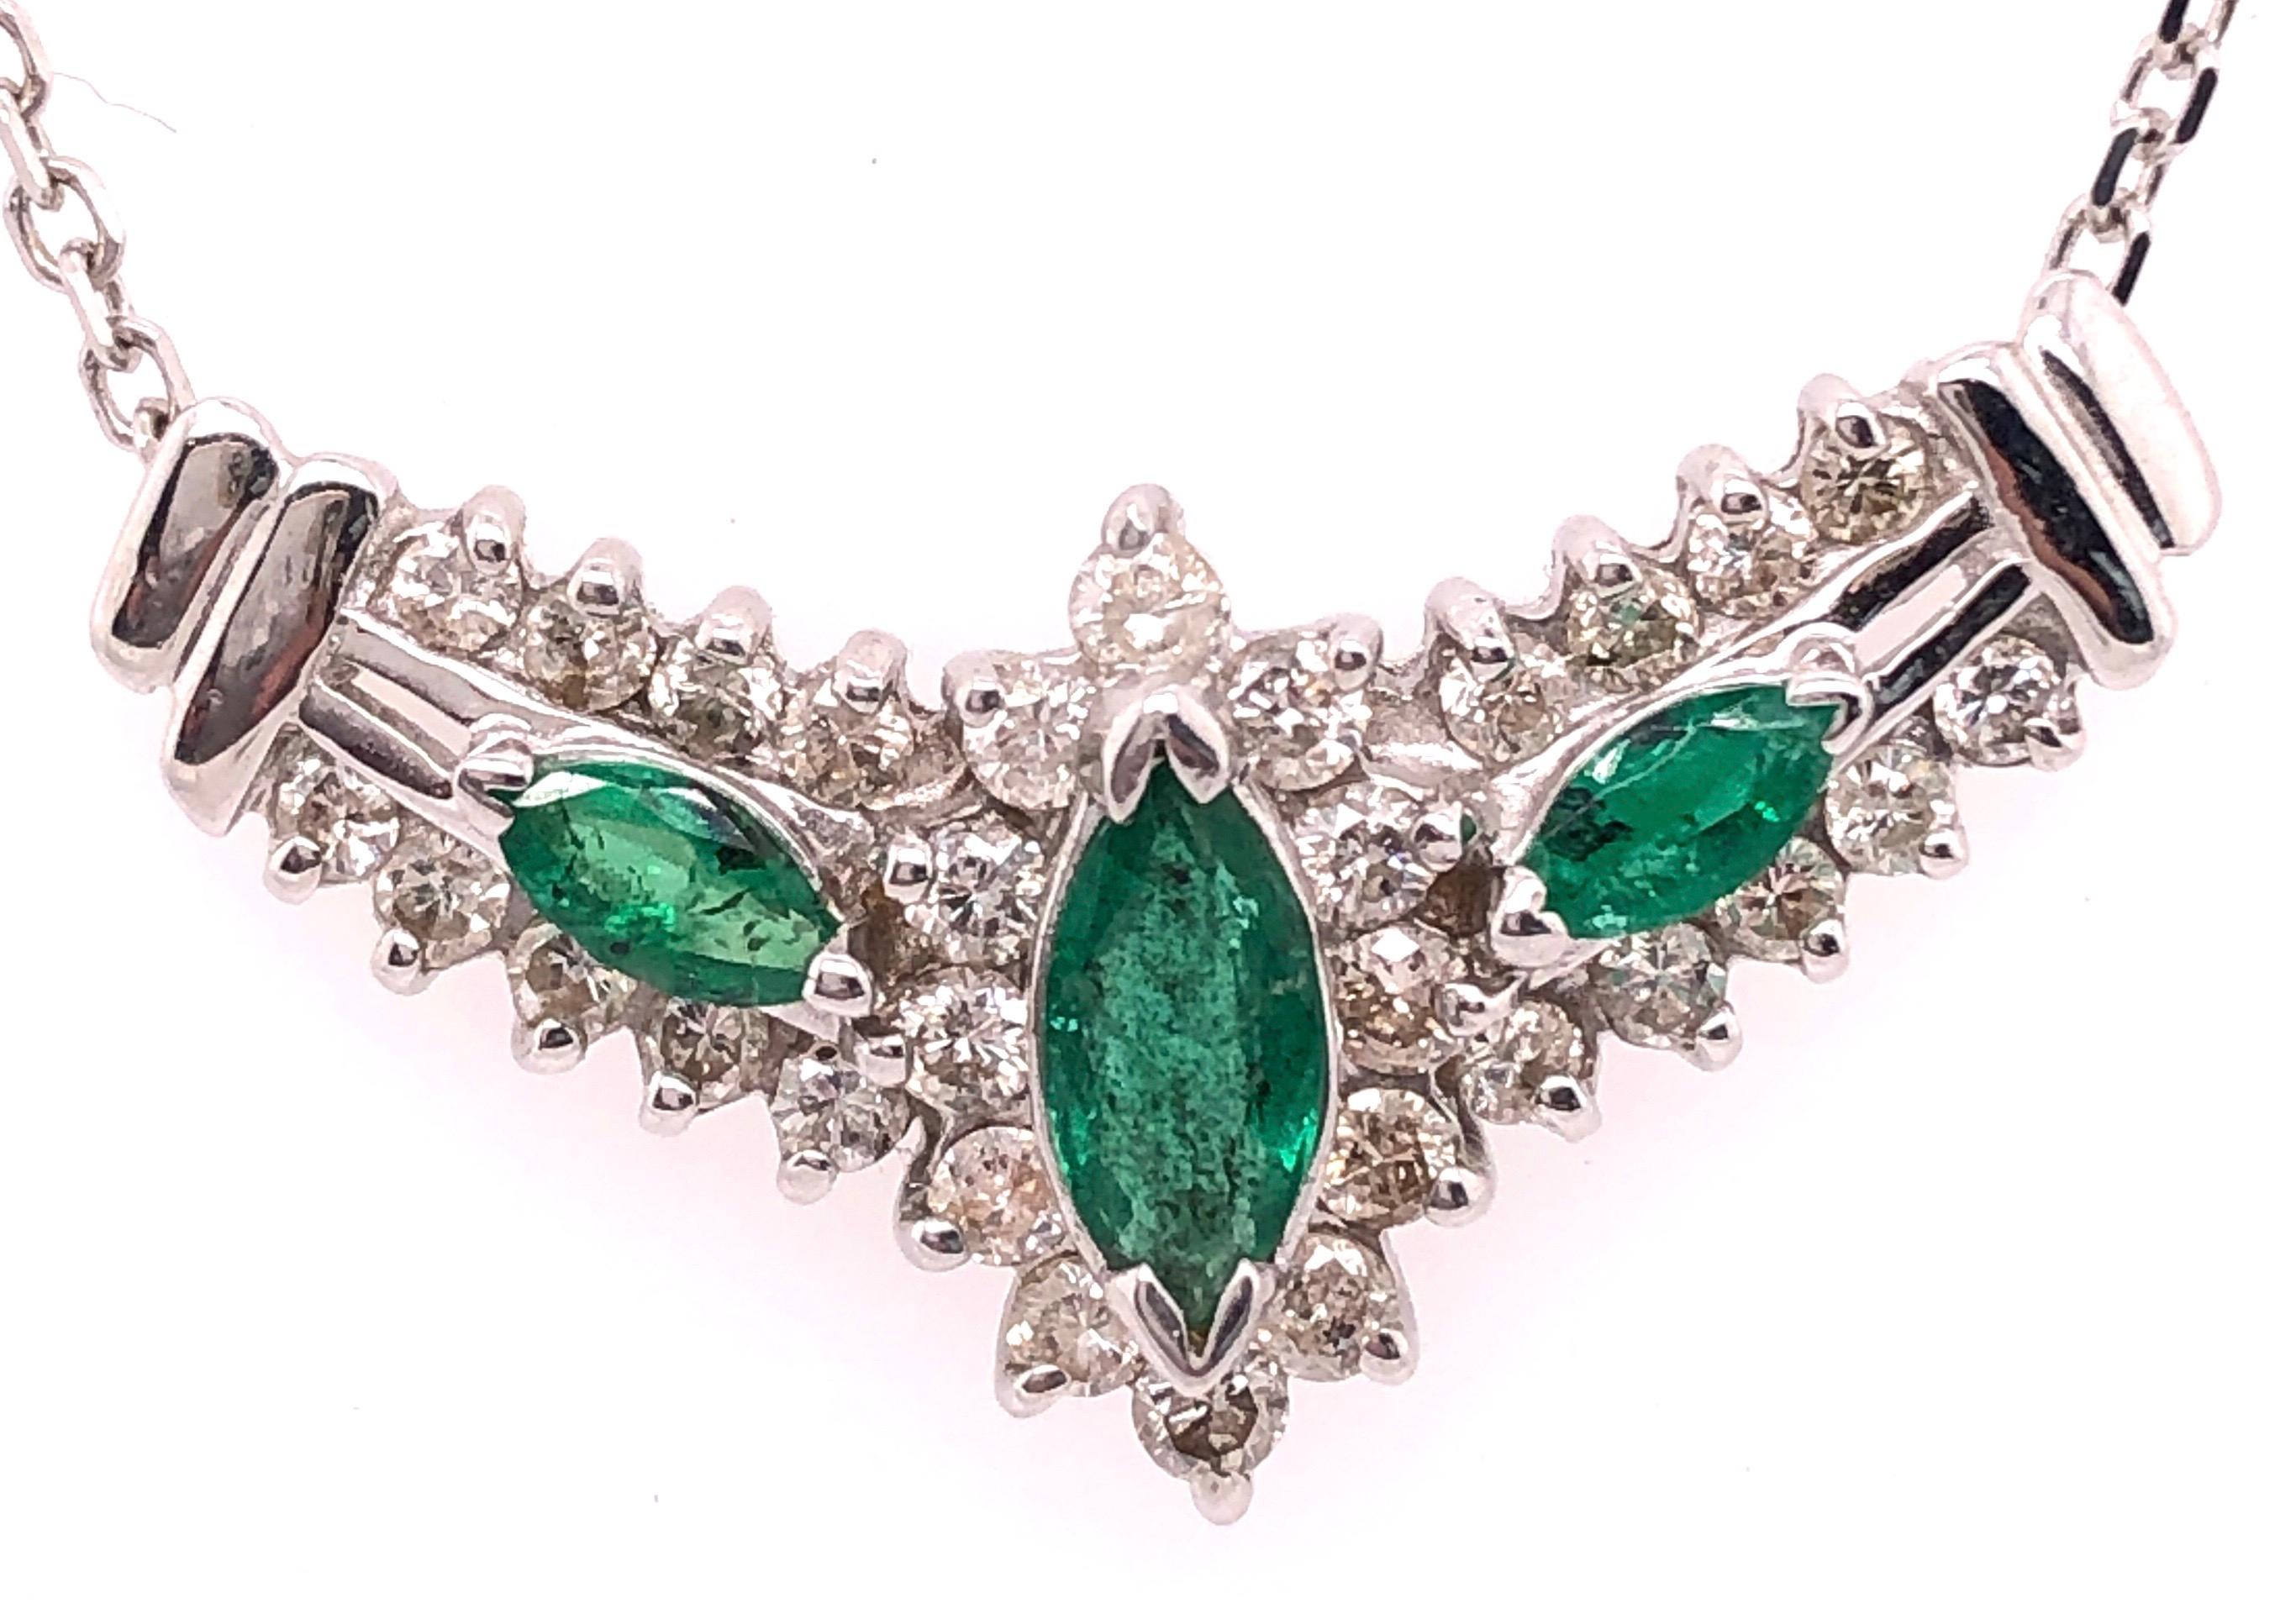 14Kt White Gold Necklace 18 inch With Soldered Diamond and Emerald Pendant
1.25 Total Diamond Weight
0.25 Total Emerald Weight
4.53 grams total weight.